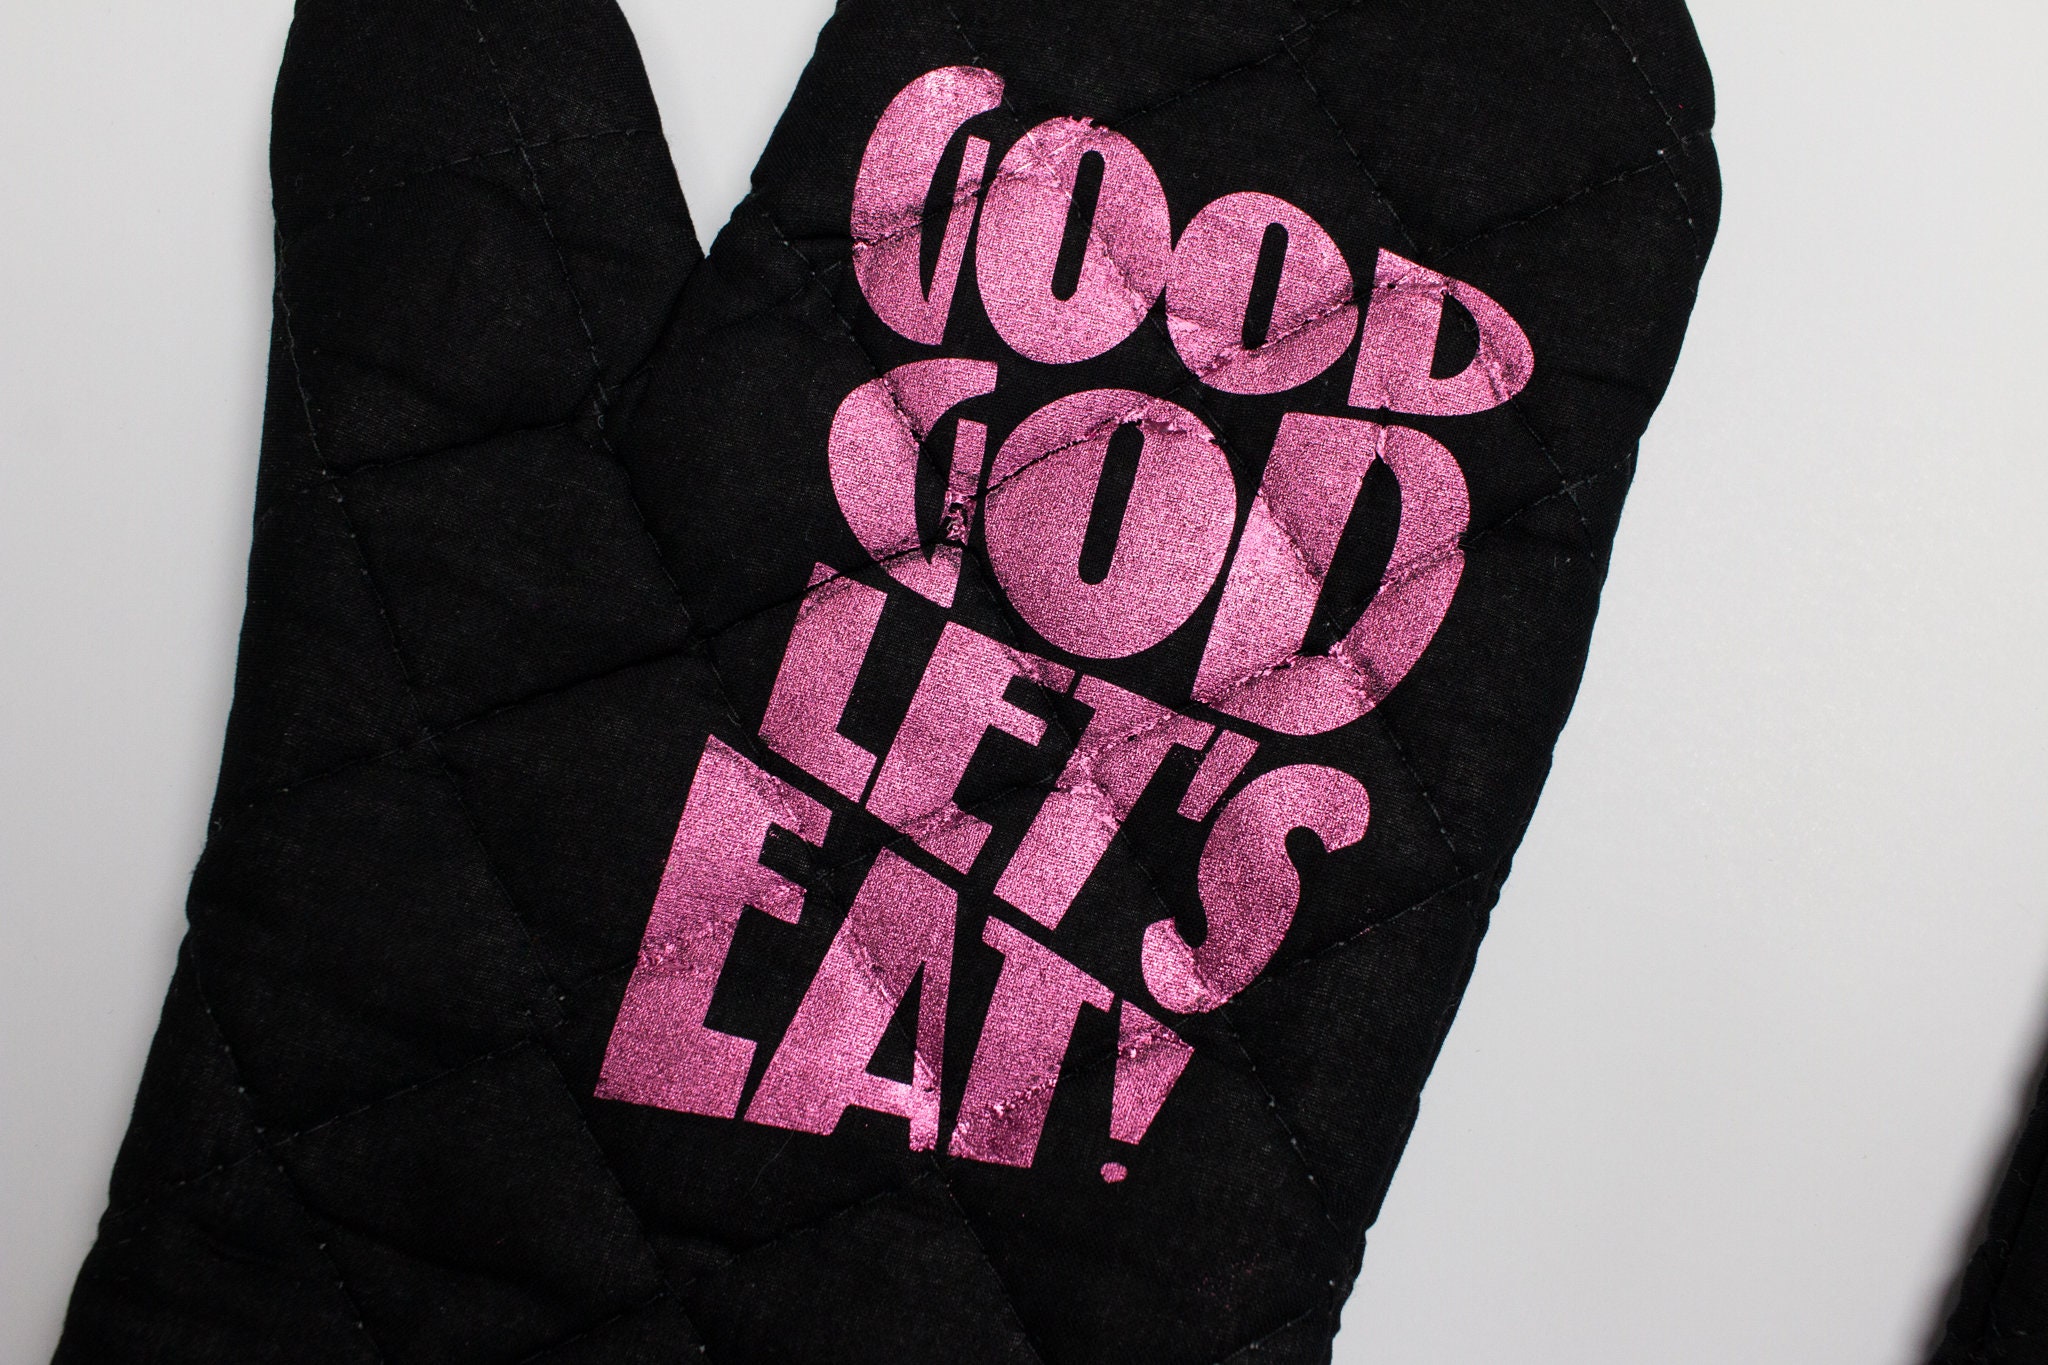 Good Food, Good Meat, Good God, Let's Eat Matching Oven Mitts Pair Set  Rainbow Print Hand Hot Pads Pot Holders Kitchen Cooking Deco Black 